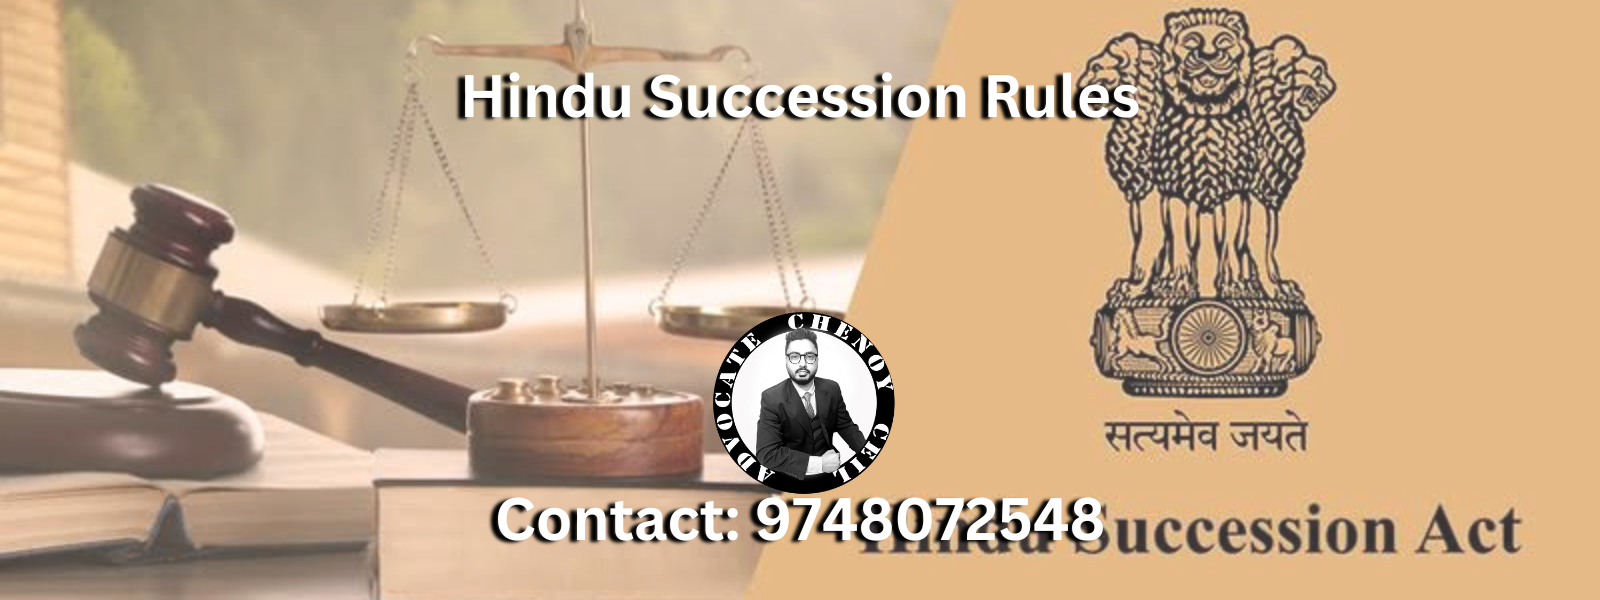 Rules of Succession amongst Hindus